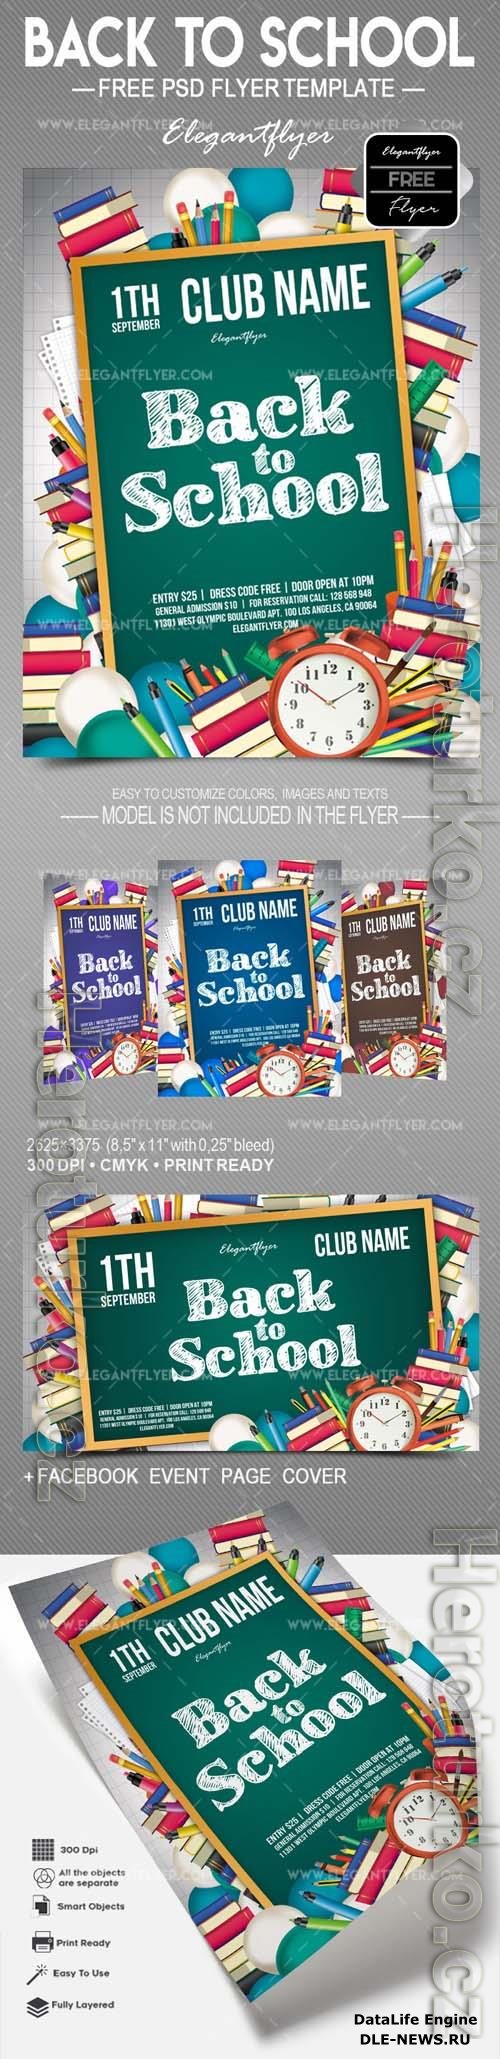 Back to School Flyer PSD Template vol 6